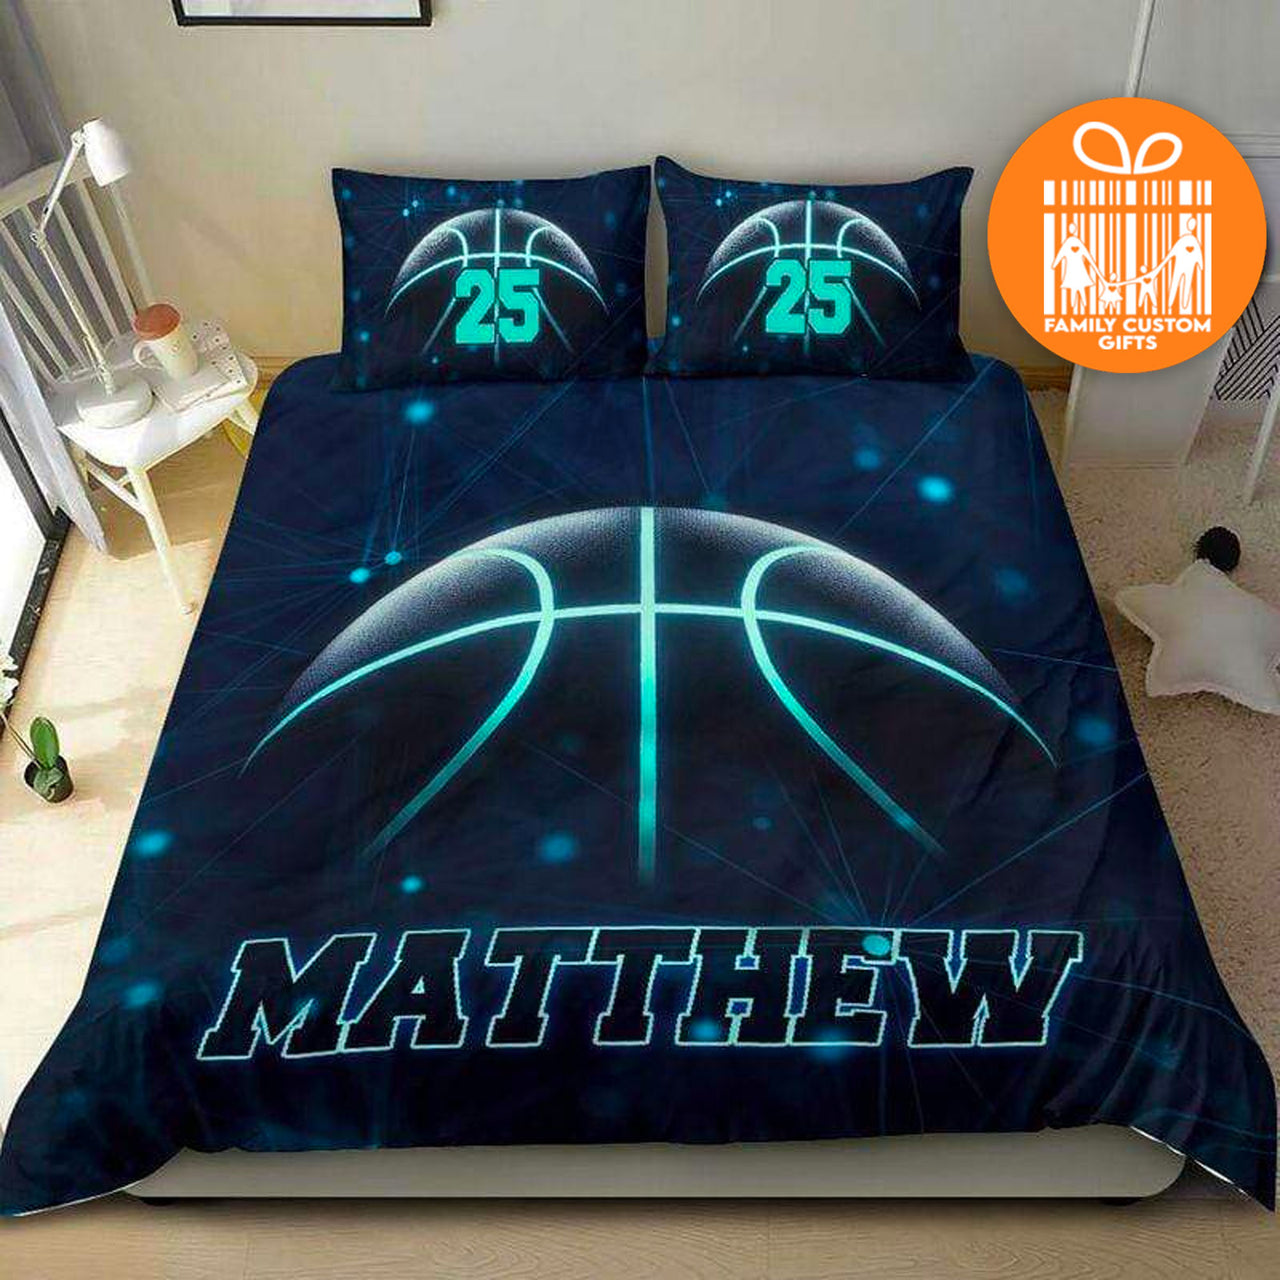 Custom Quilt Sets for Kids Teens Adult Basketball Blue Light Personalized Quilt Bedding